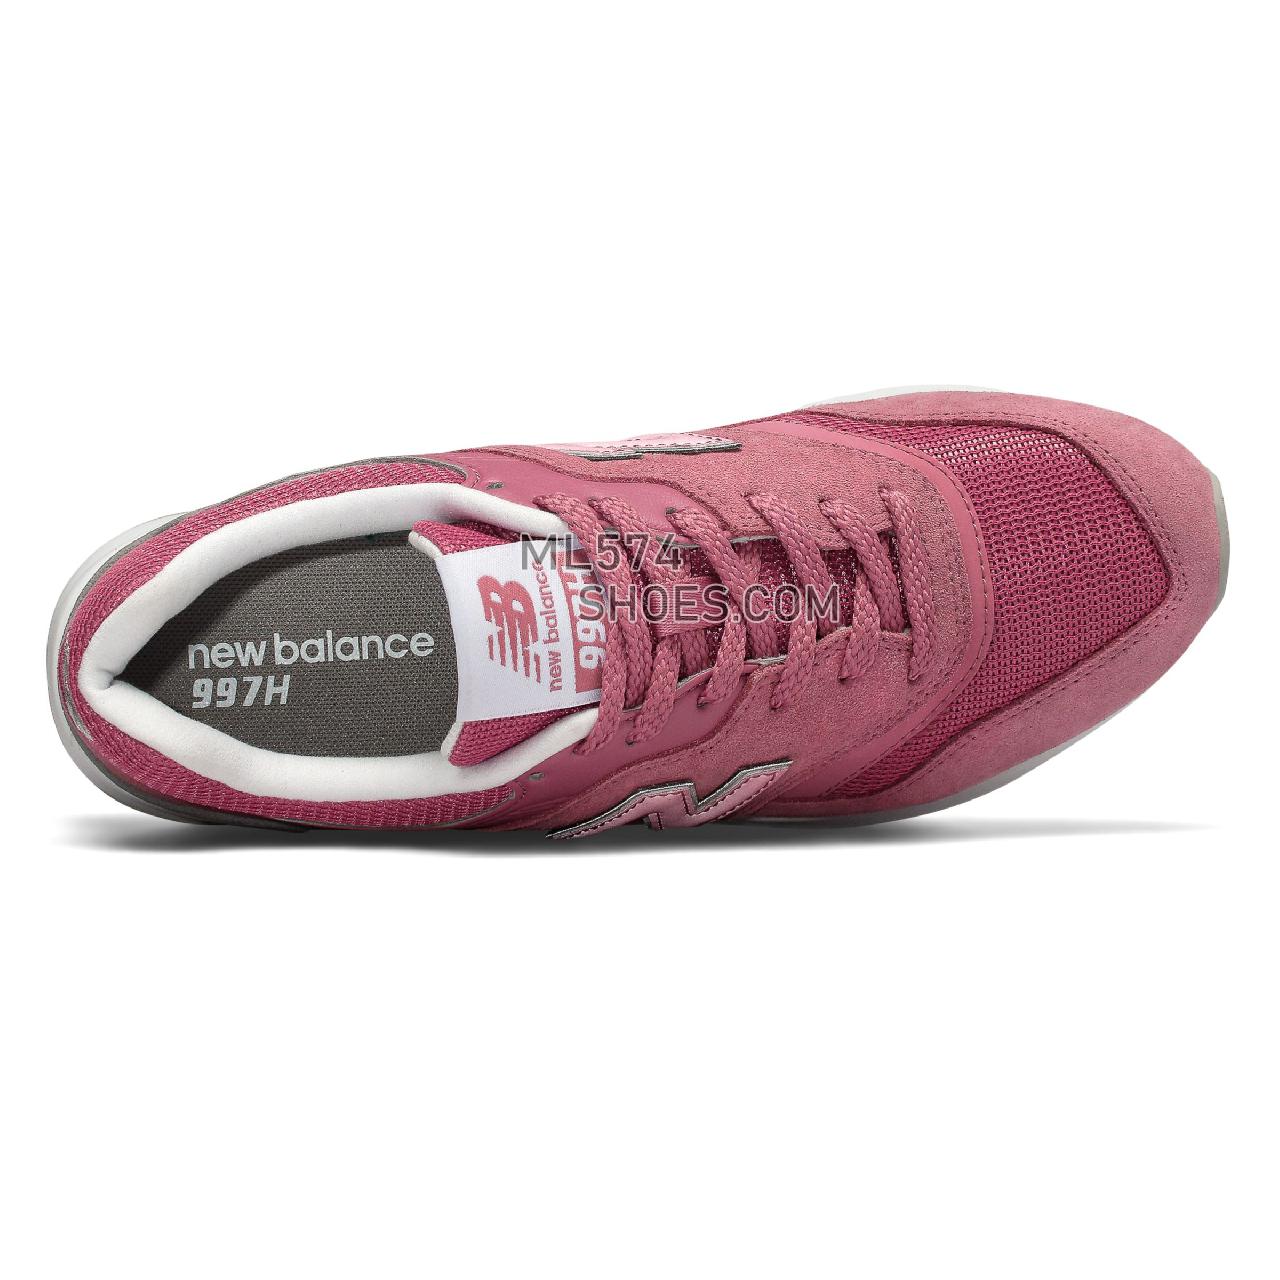 New Balance 997H Classic Essential - Women's Sport Style Sneakers - Mineral Rose with Light Cyclone - CW997HCB